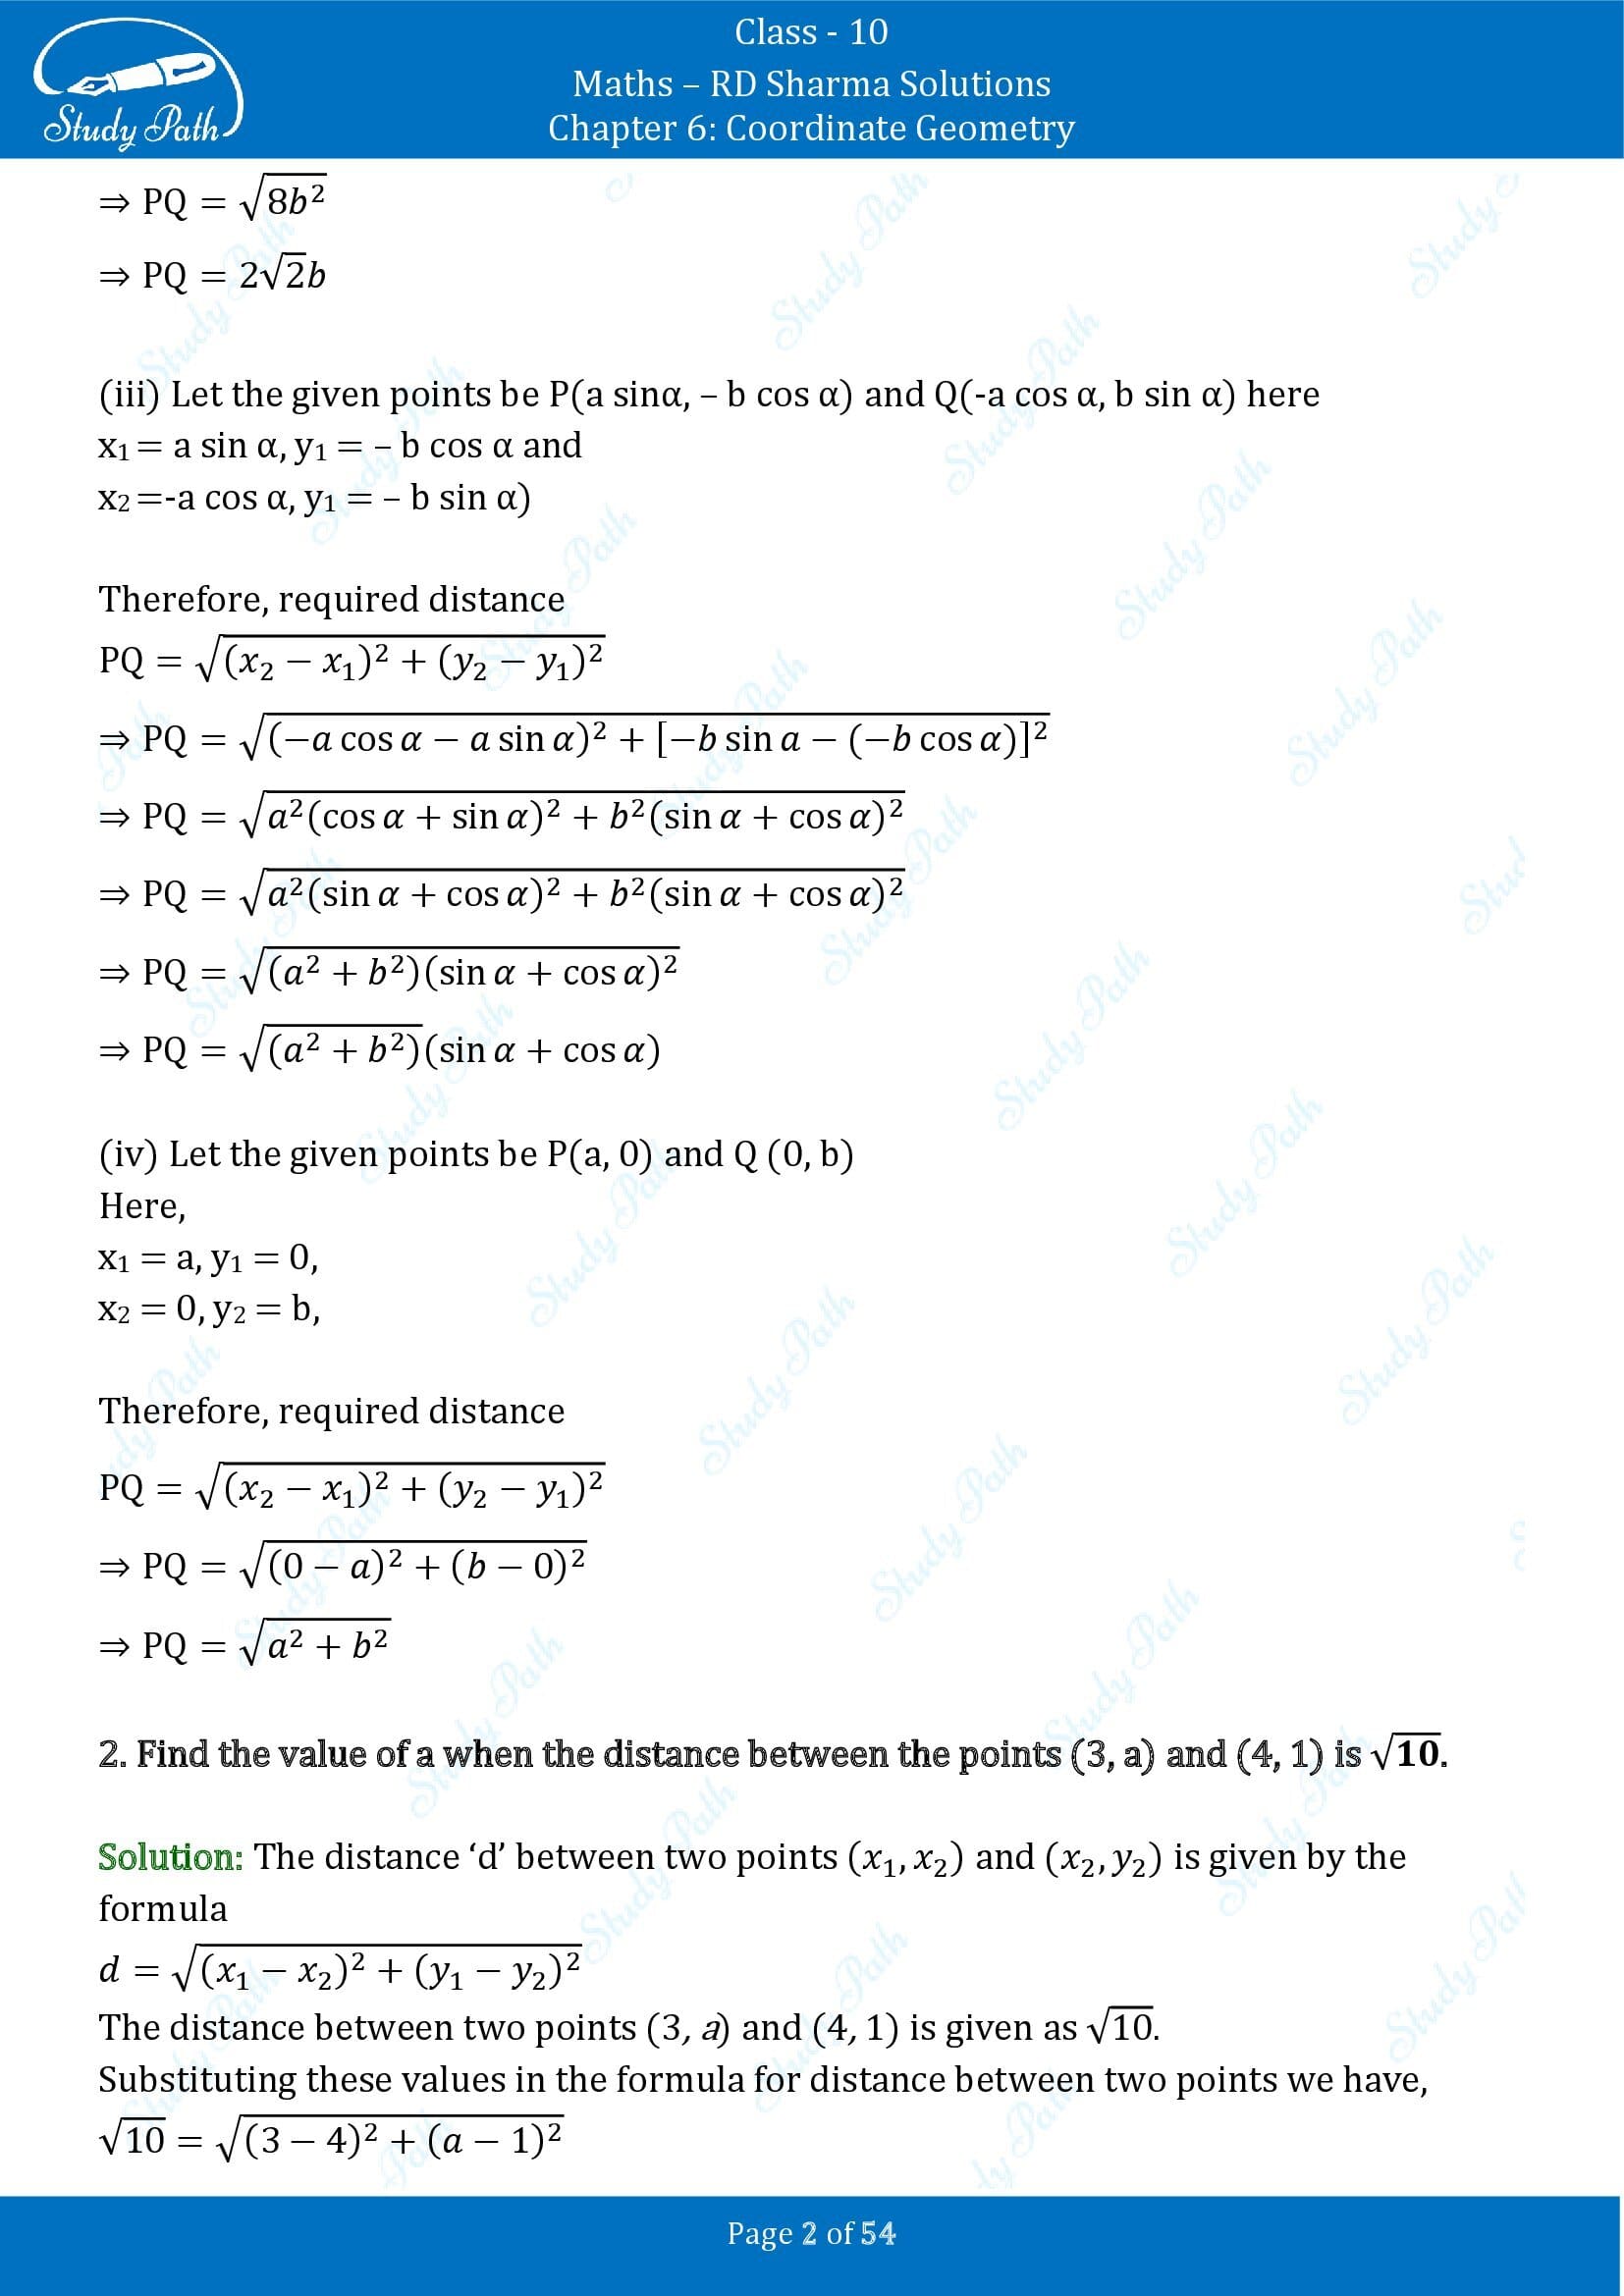 RD Sharma Solutions Class 10 Chapter 6 Coordinate Geometry Exercise 6.2 0002